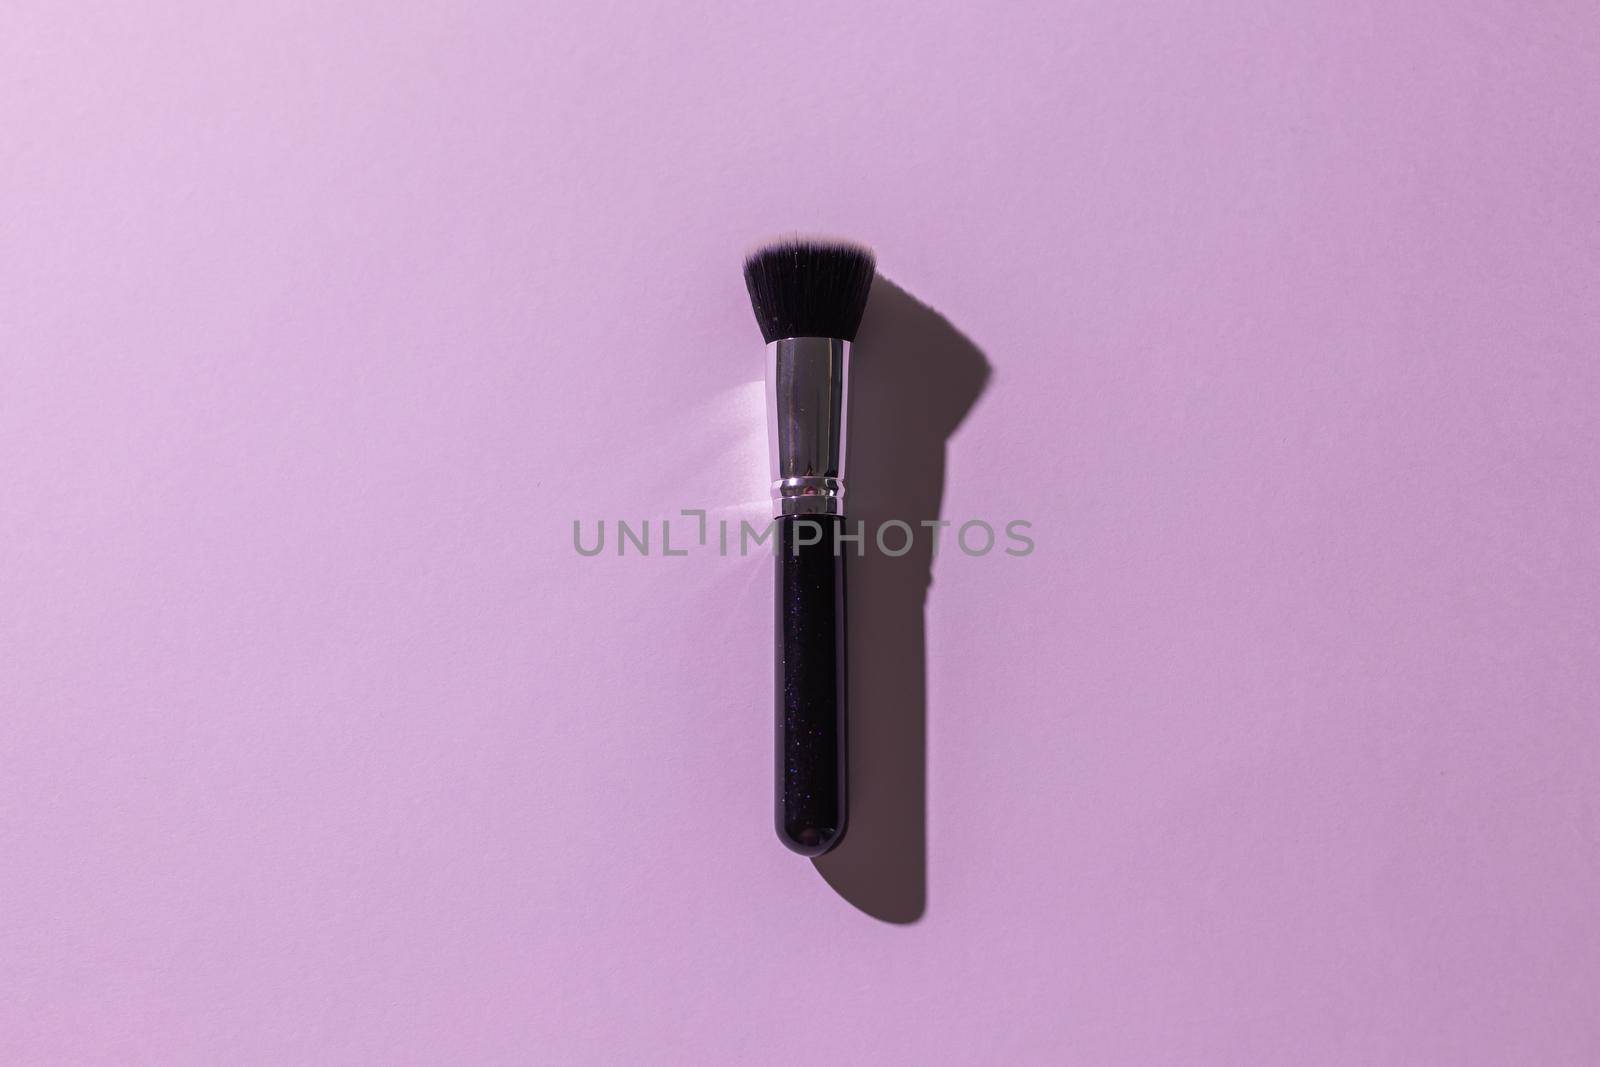 Make-up brush on white background, top view. Cosmetics, beauty and skin care concept